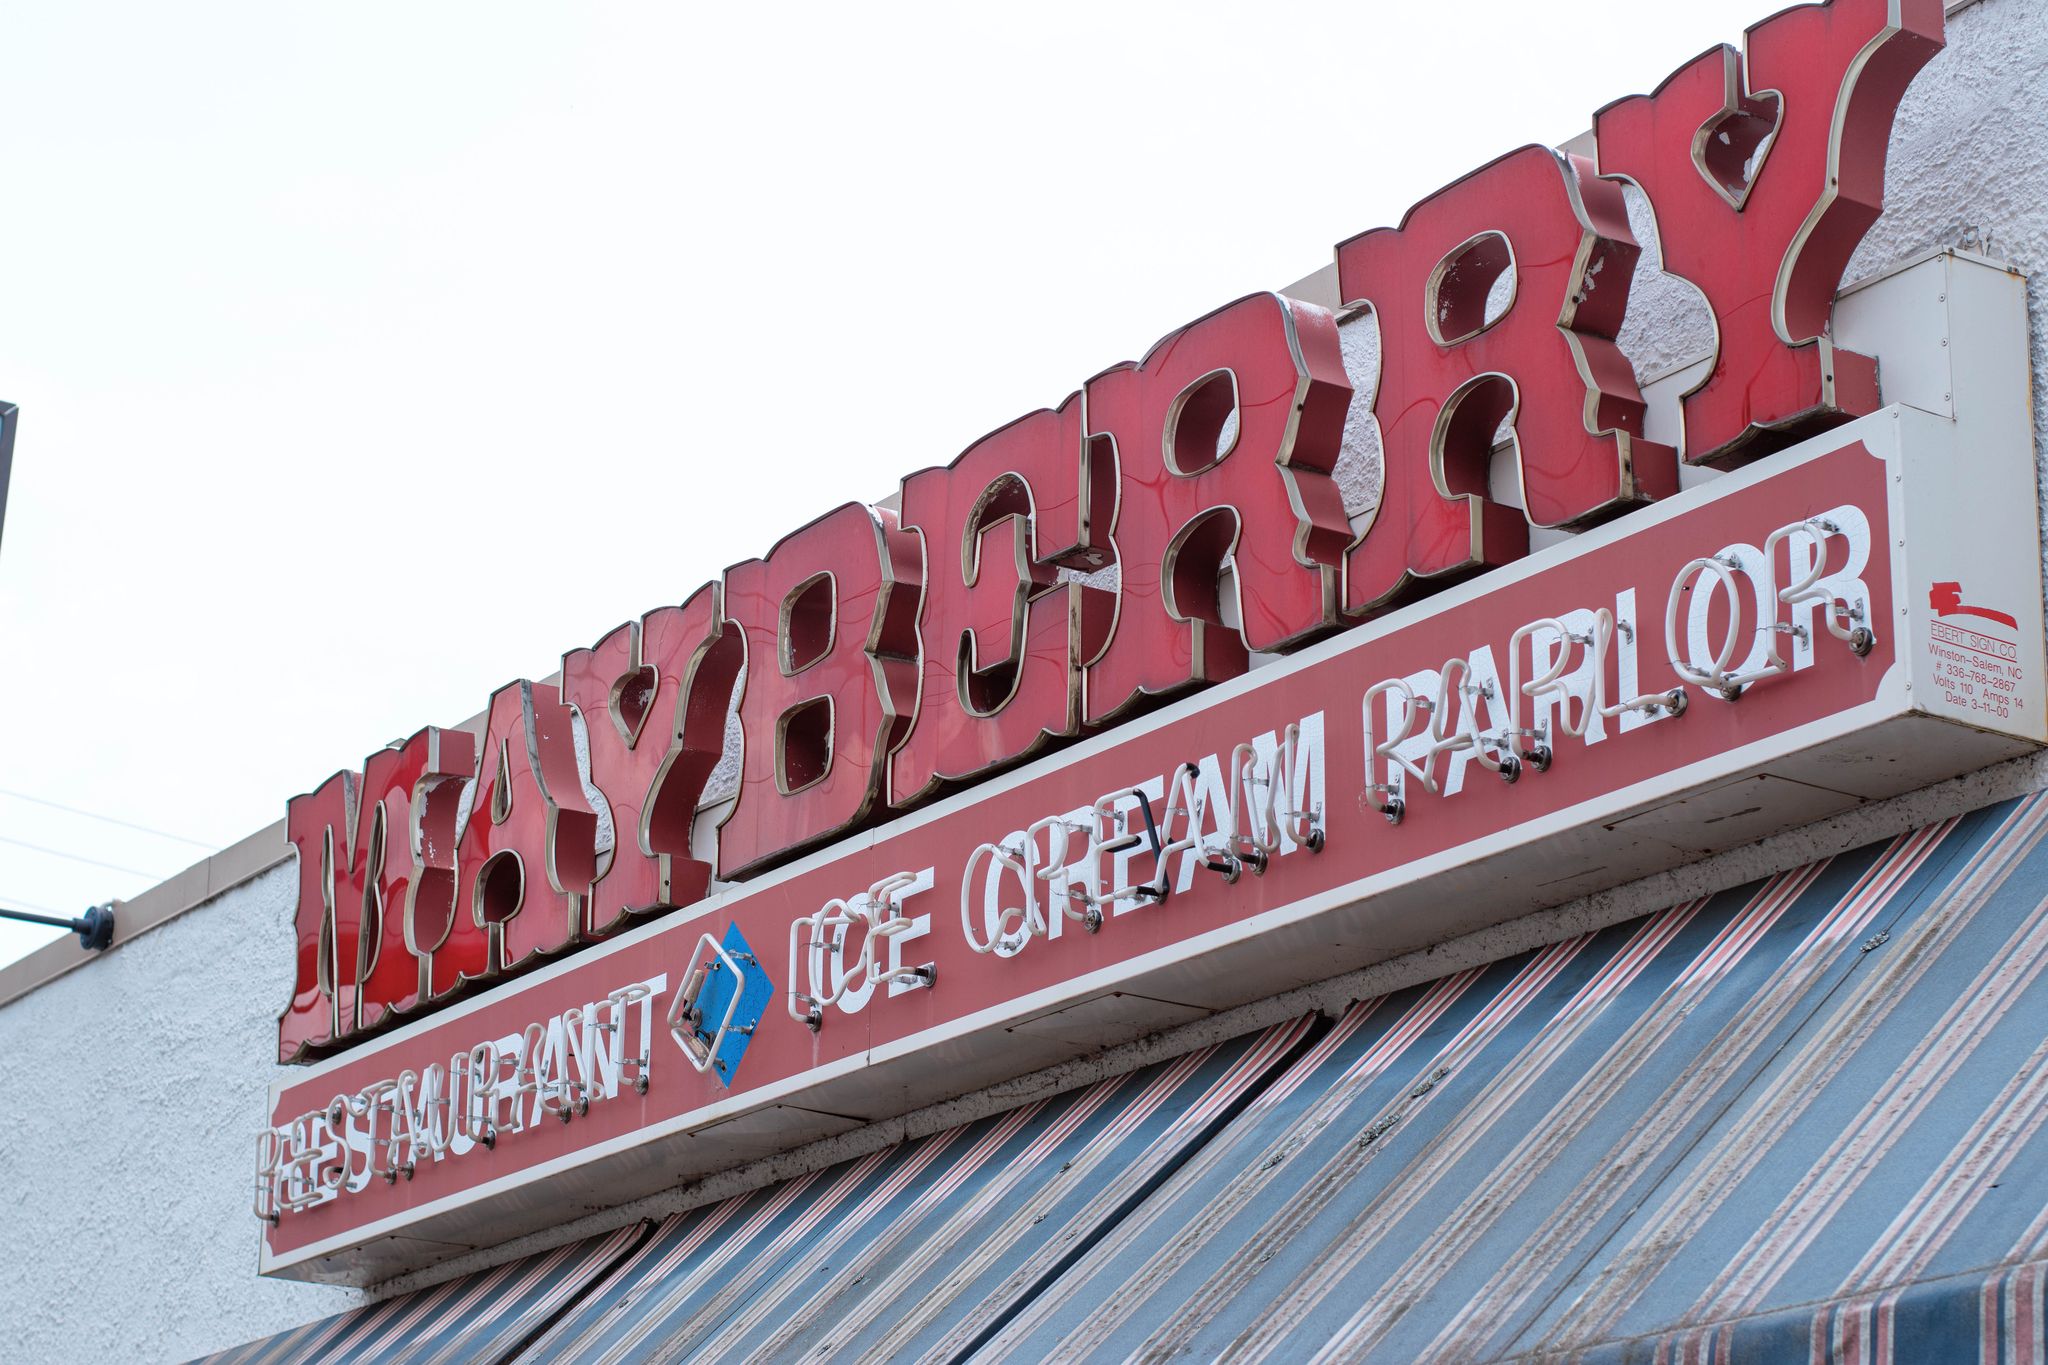 Mayberry's Ice Cream sign in High Point, NC.